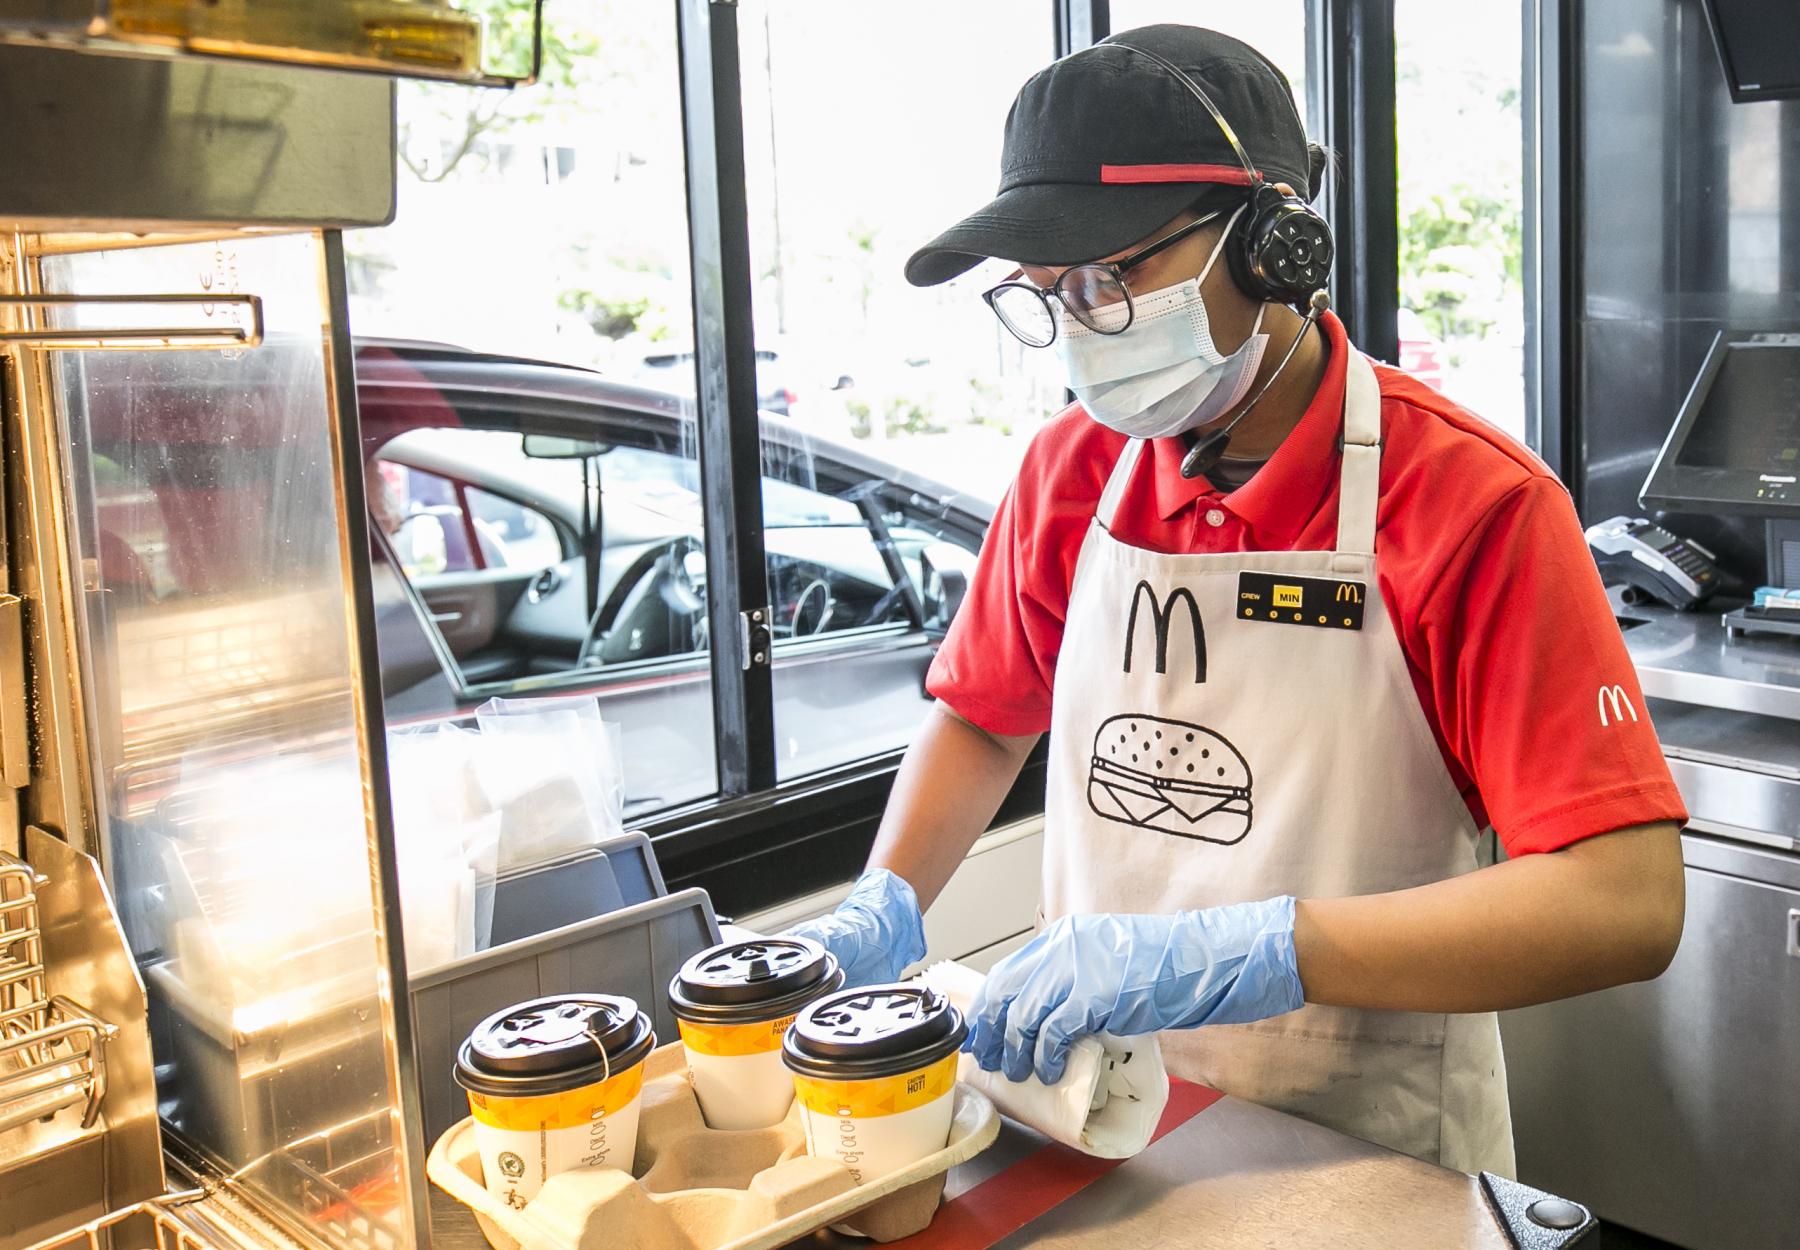 MCDONALD’S MALAYSIA’S DRIVE-THRU CARNIVAL DELIVERS FEEL-GOOD MOMENTS THIS MERDEKA